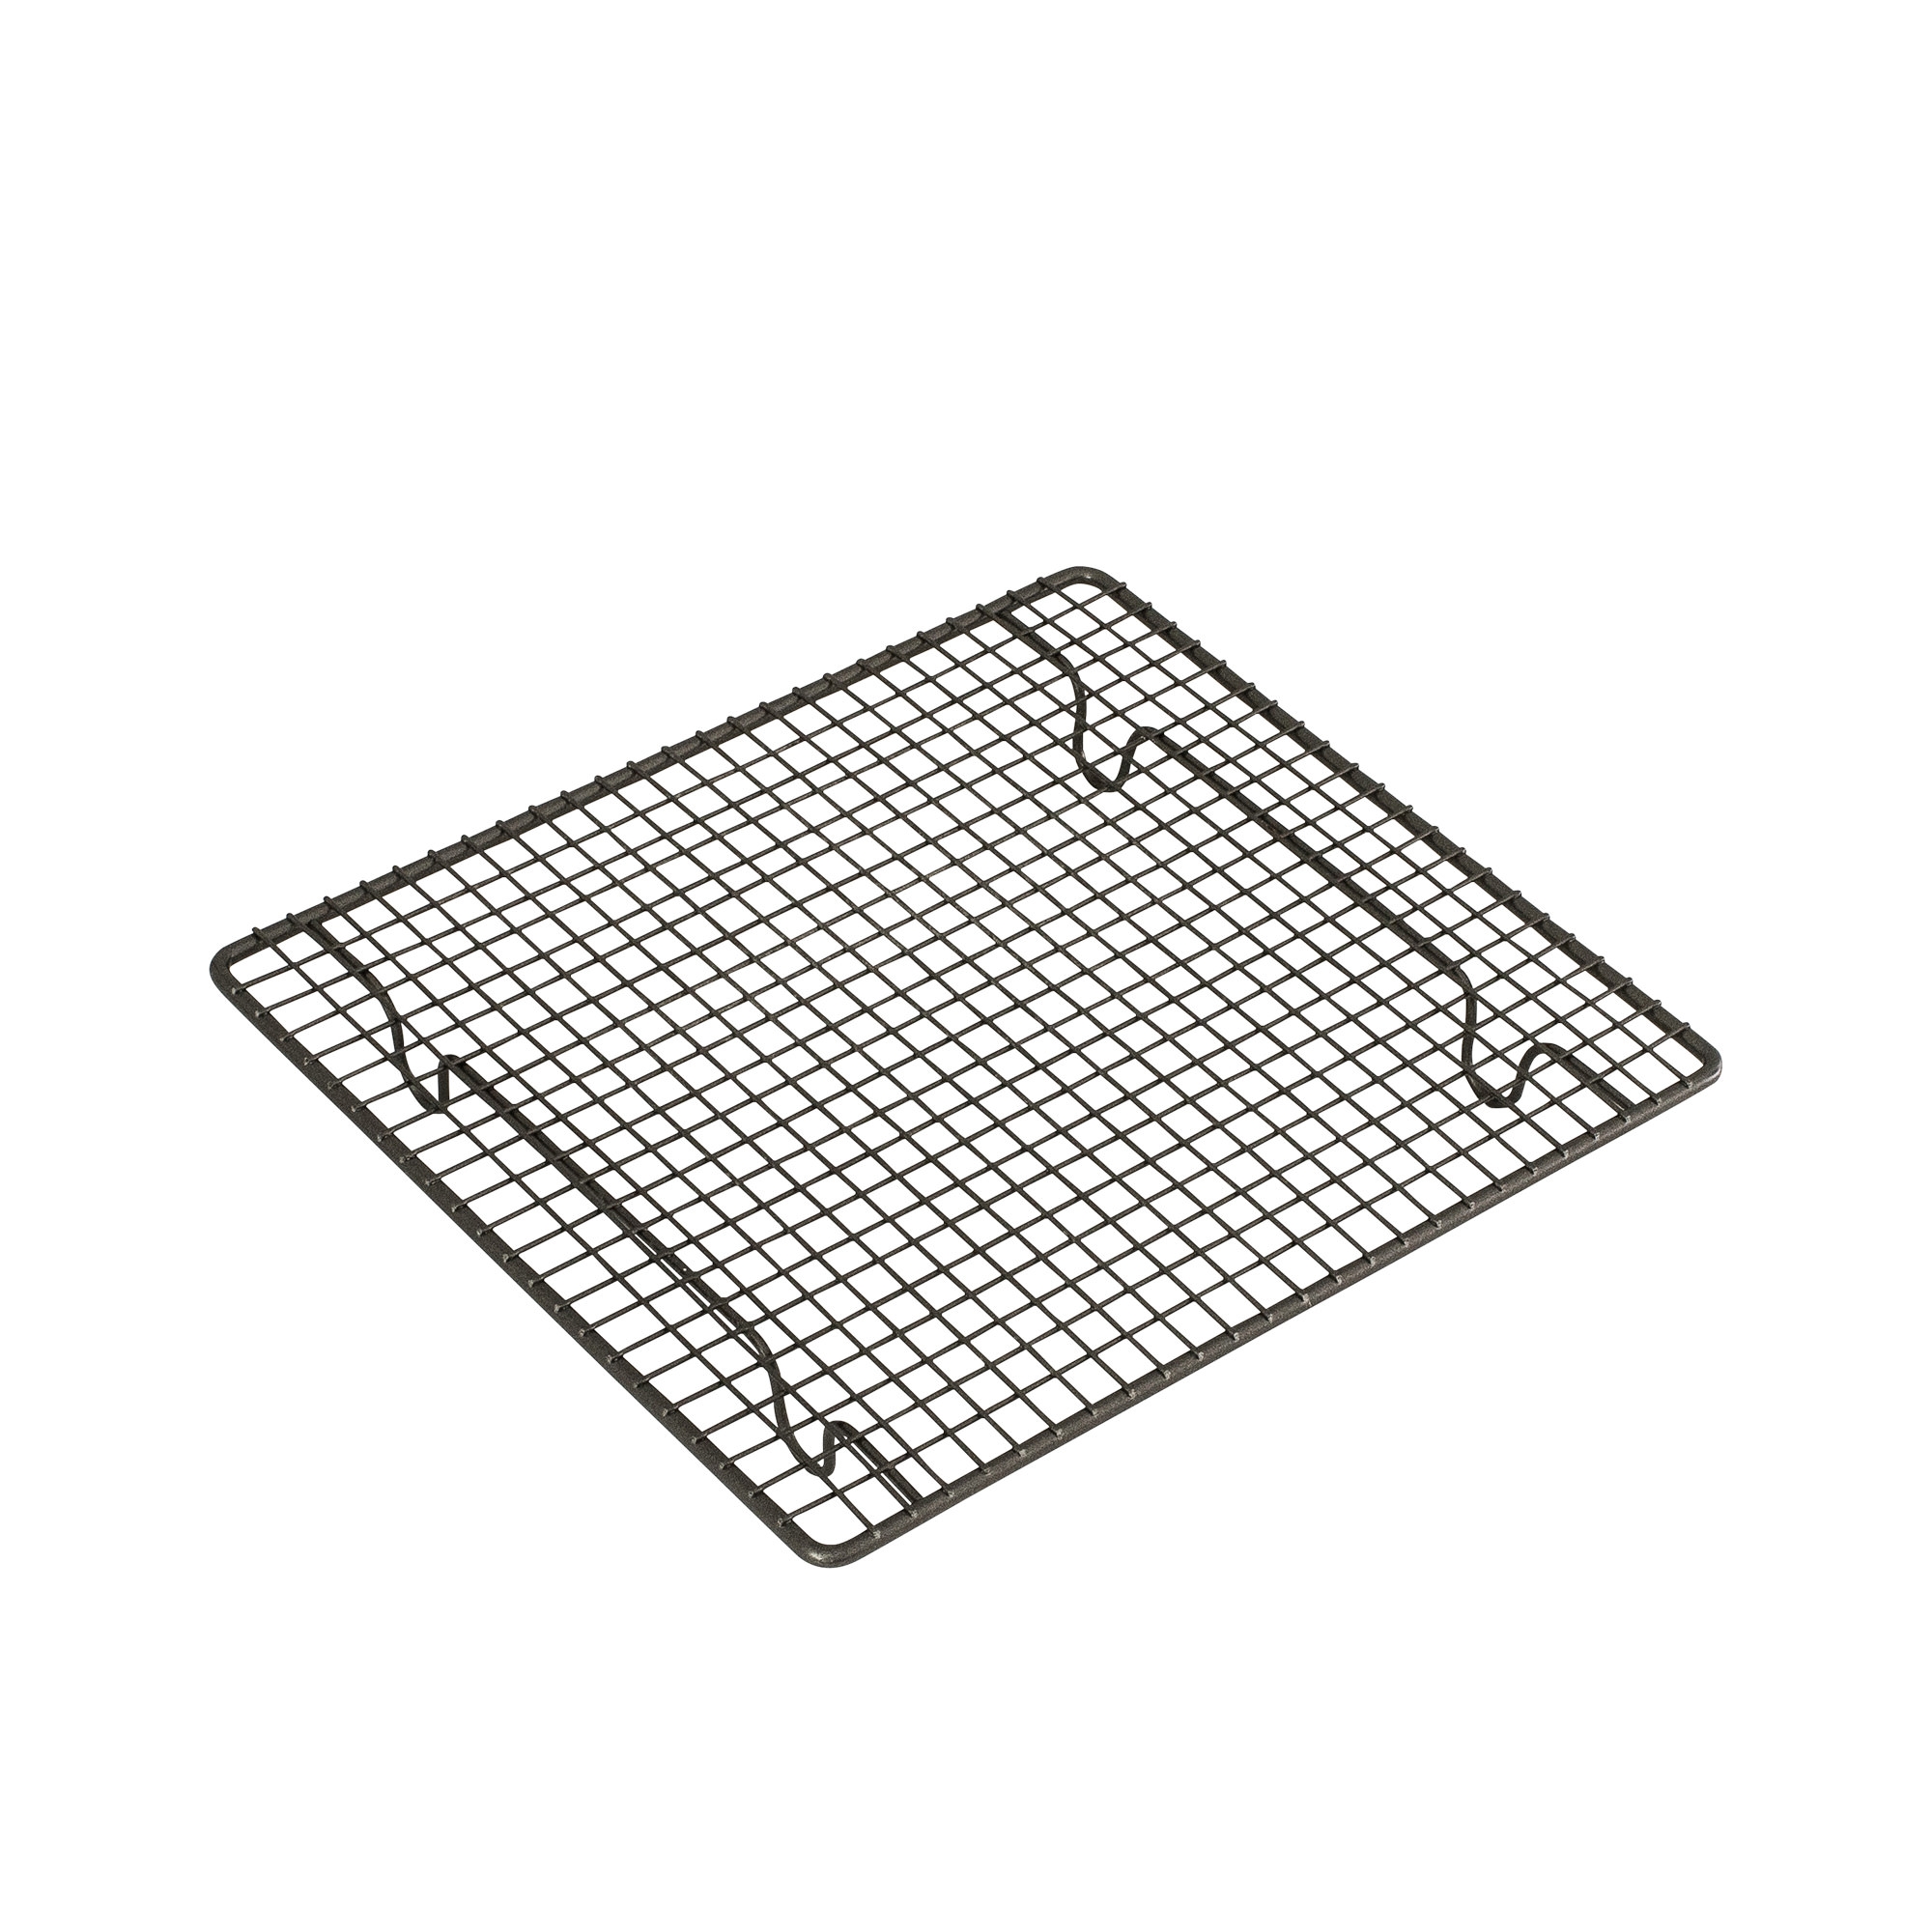 Bakemaster Non Stick Cooling Tray 25x23cm Image 1